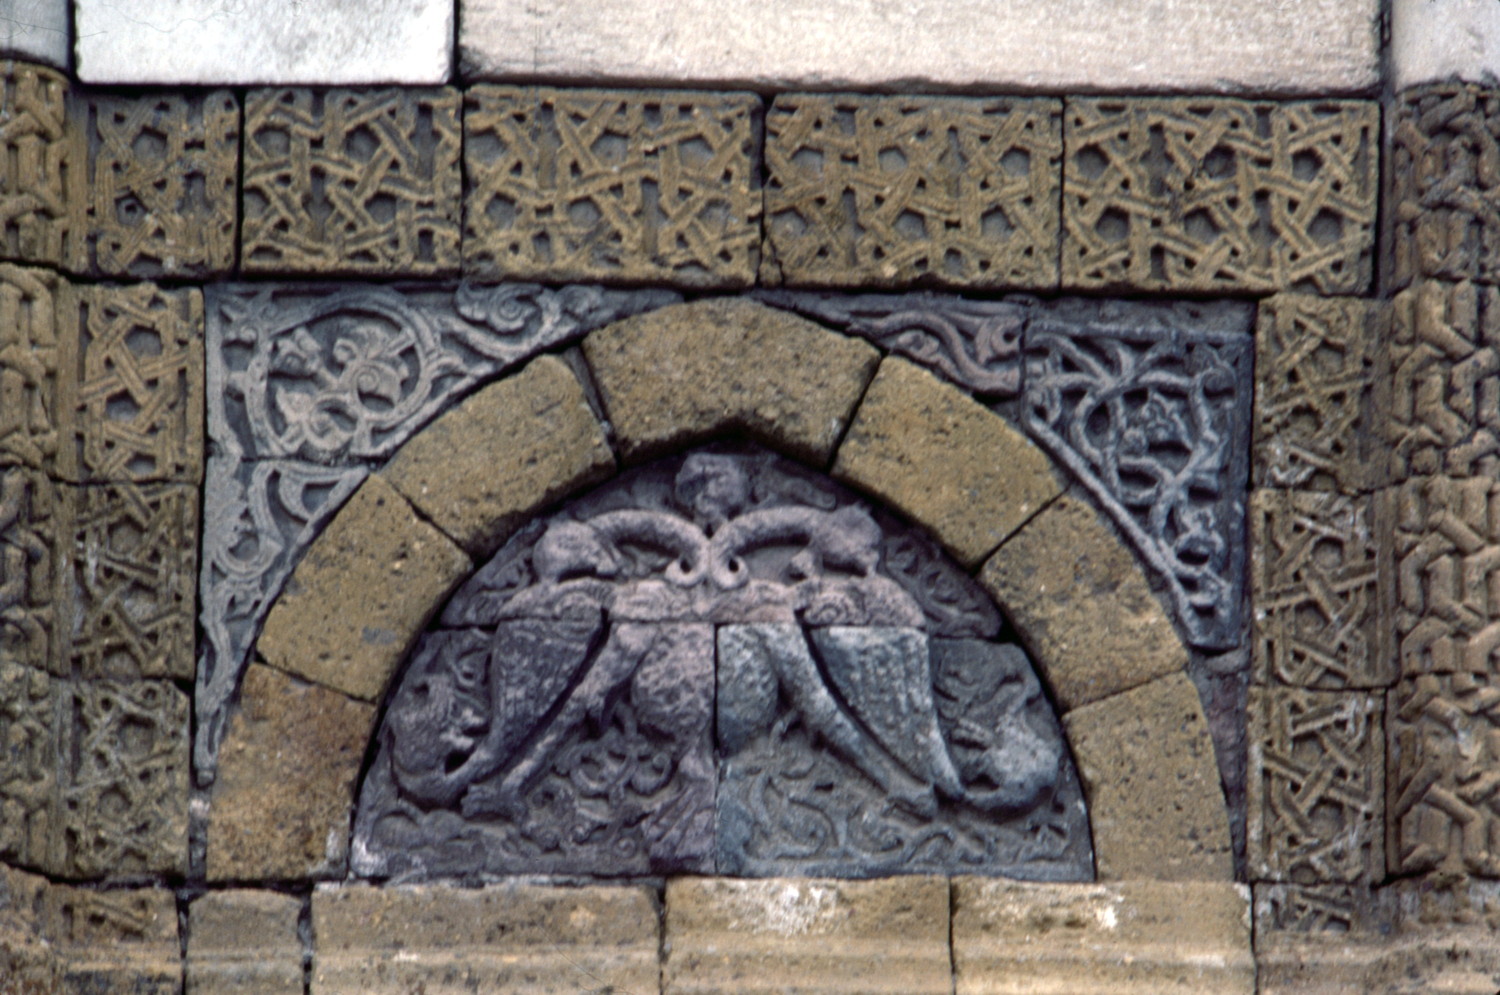 Exterior detail of upper level window with relief above